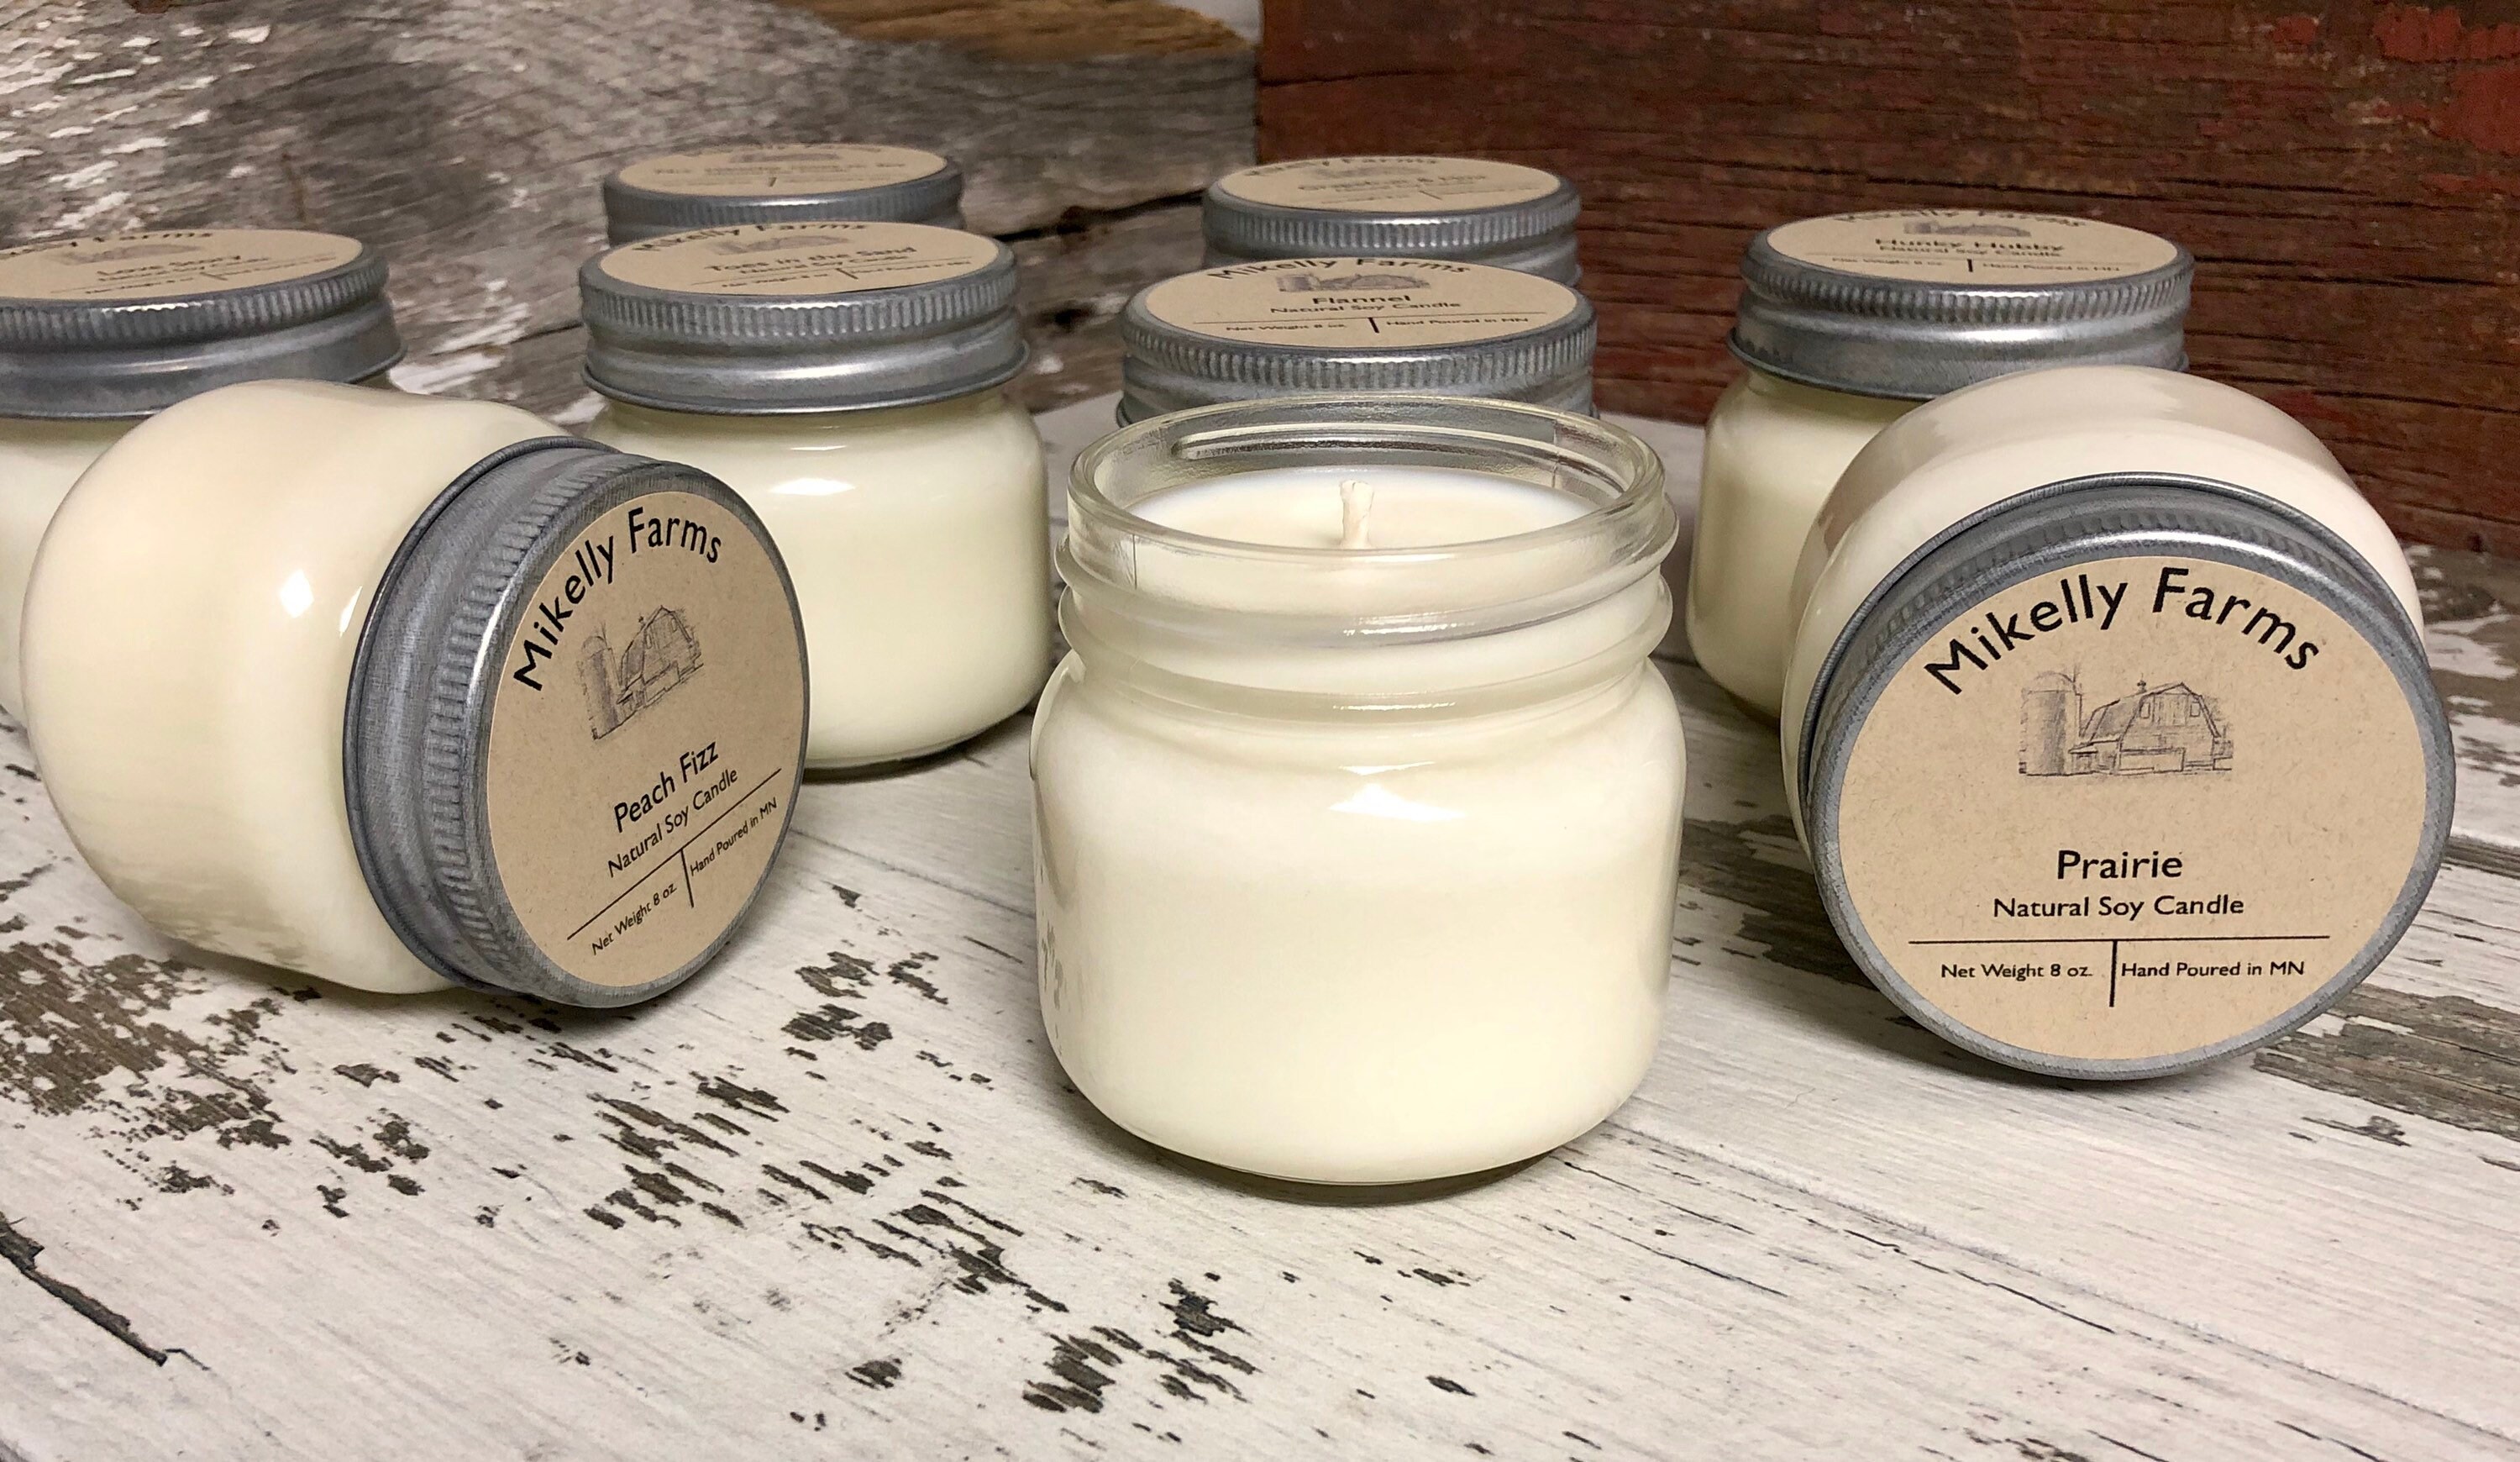 8 oz Mason Jar Soy Candles - Rustic Lids - 12 Pack – My Heavenly Scents